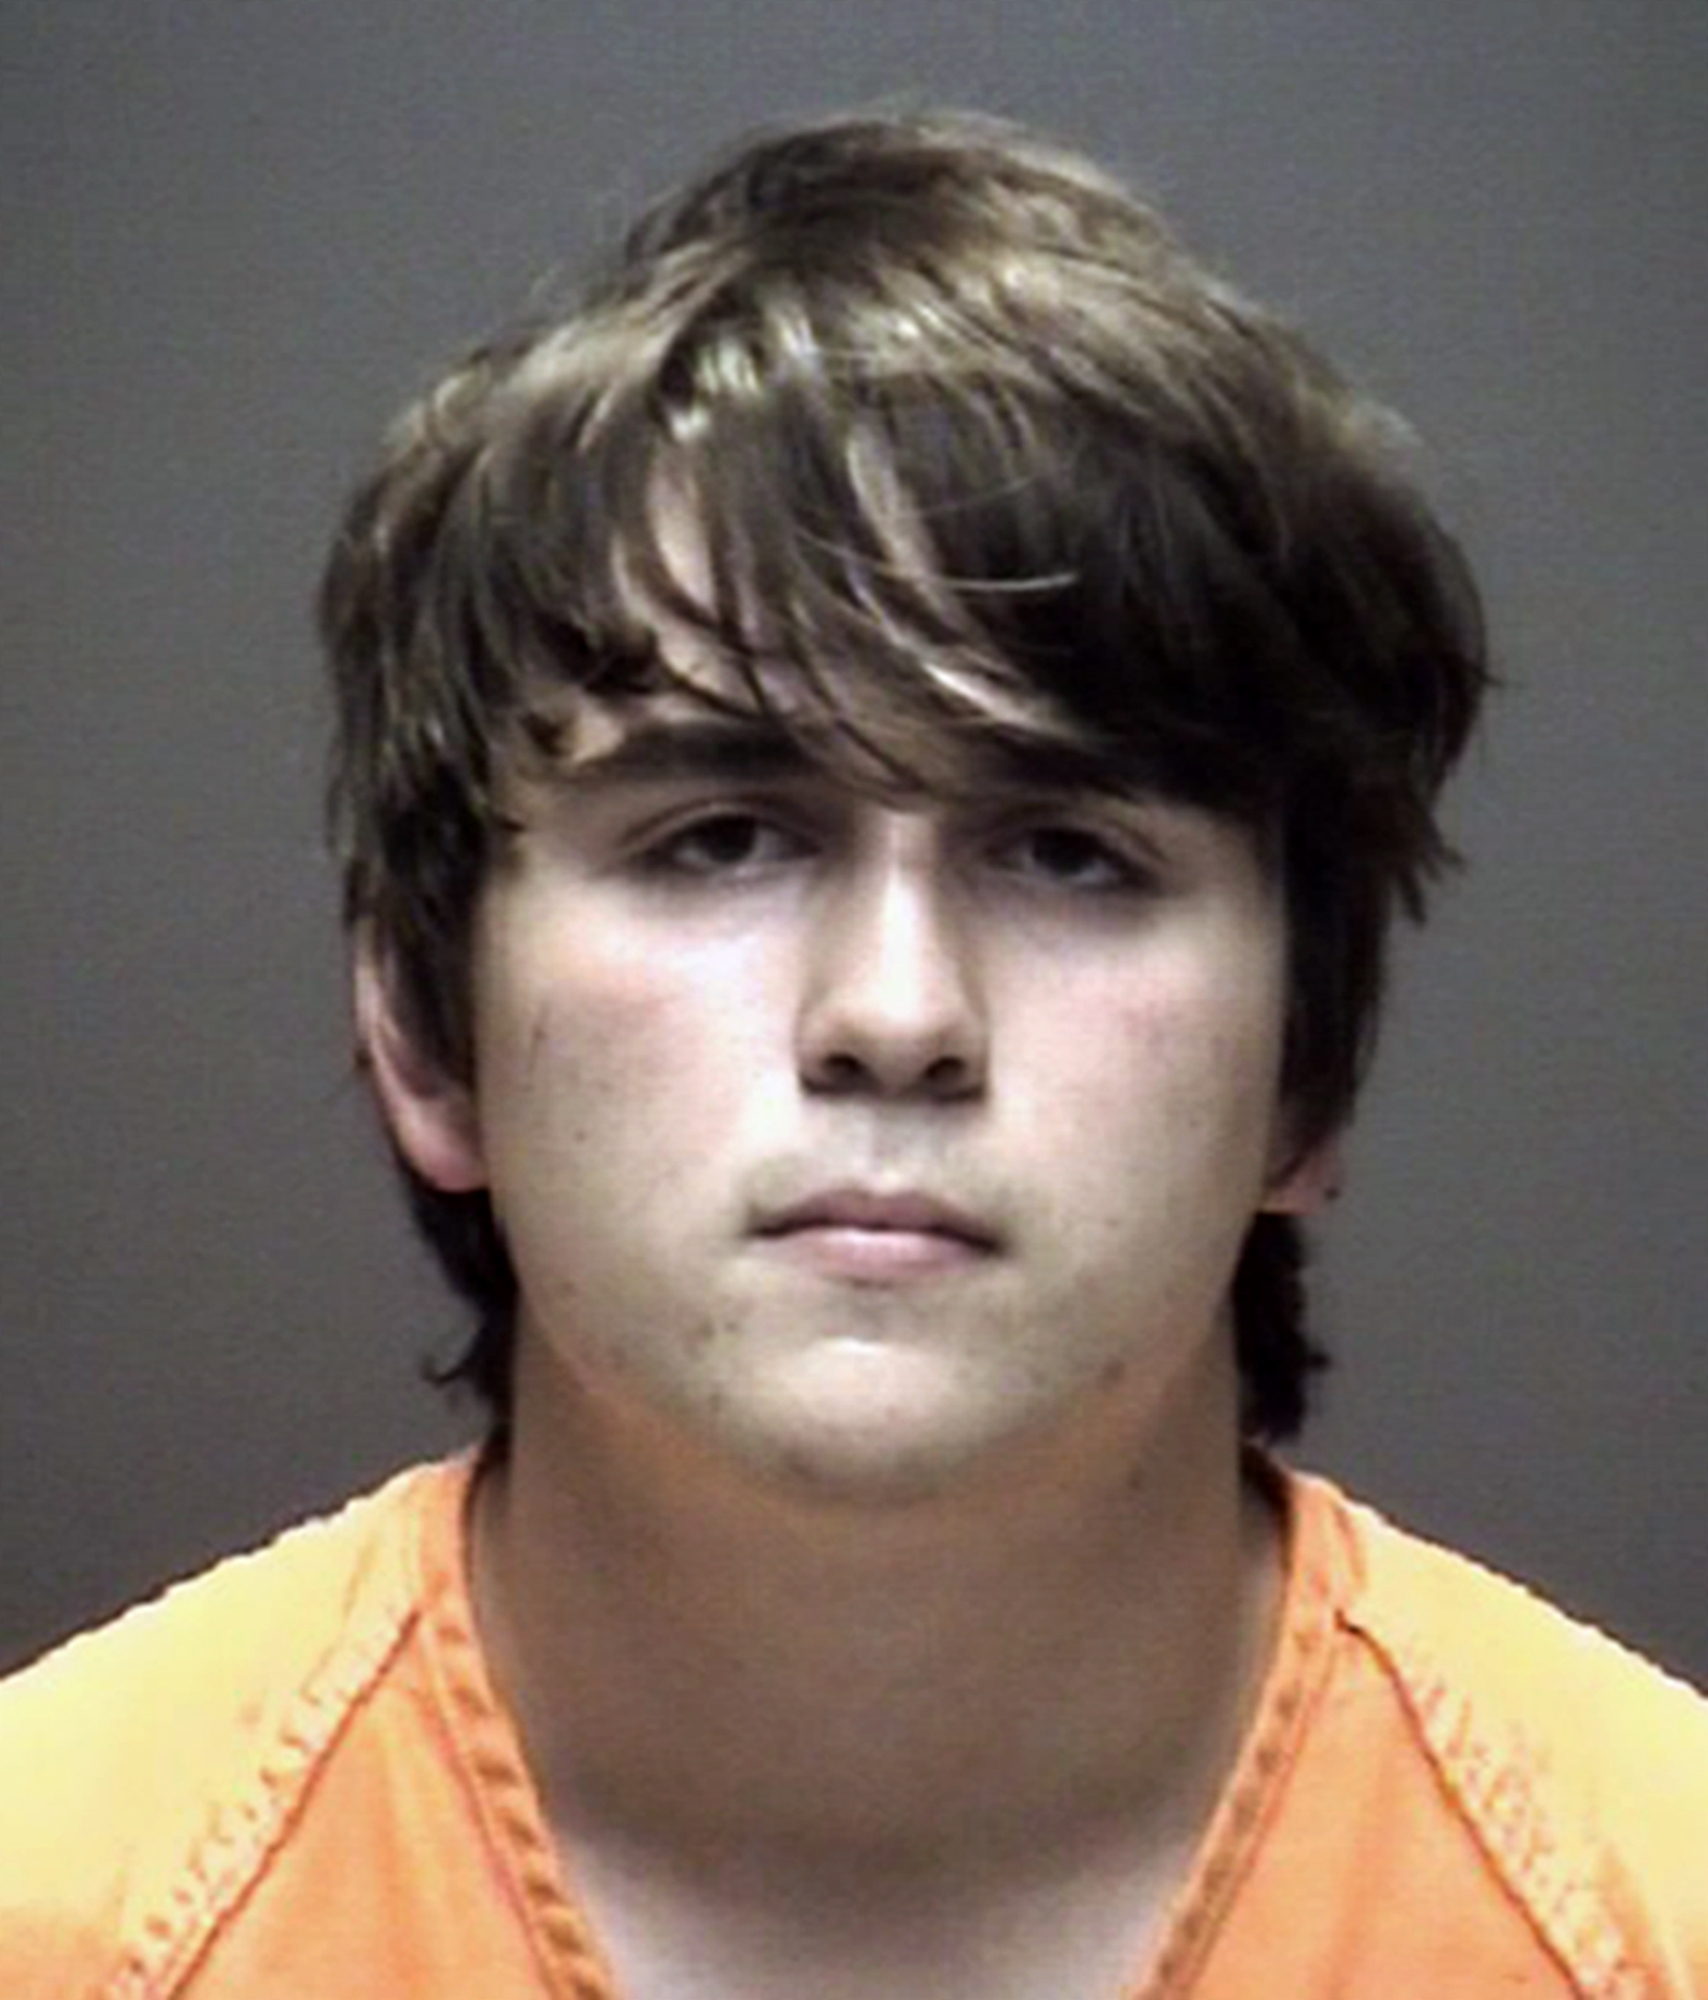 School Shooting Texas This photo provided by the Galveston County Sheriff's Office shows Dimitrios Pagourtzis, who law enforcement officials took into custody Friday, May 18, 2018, and identified as the suspect in the deadly school shooting in Santa Fe, Texas, near Houston. (Galveston County Sheriff's Office via AP)